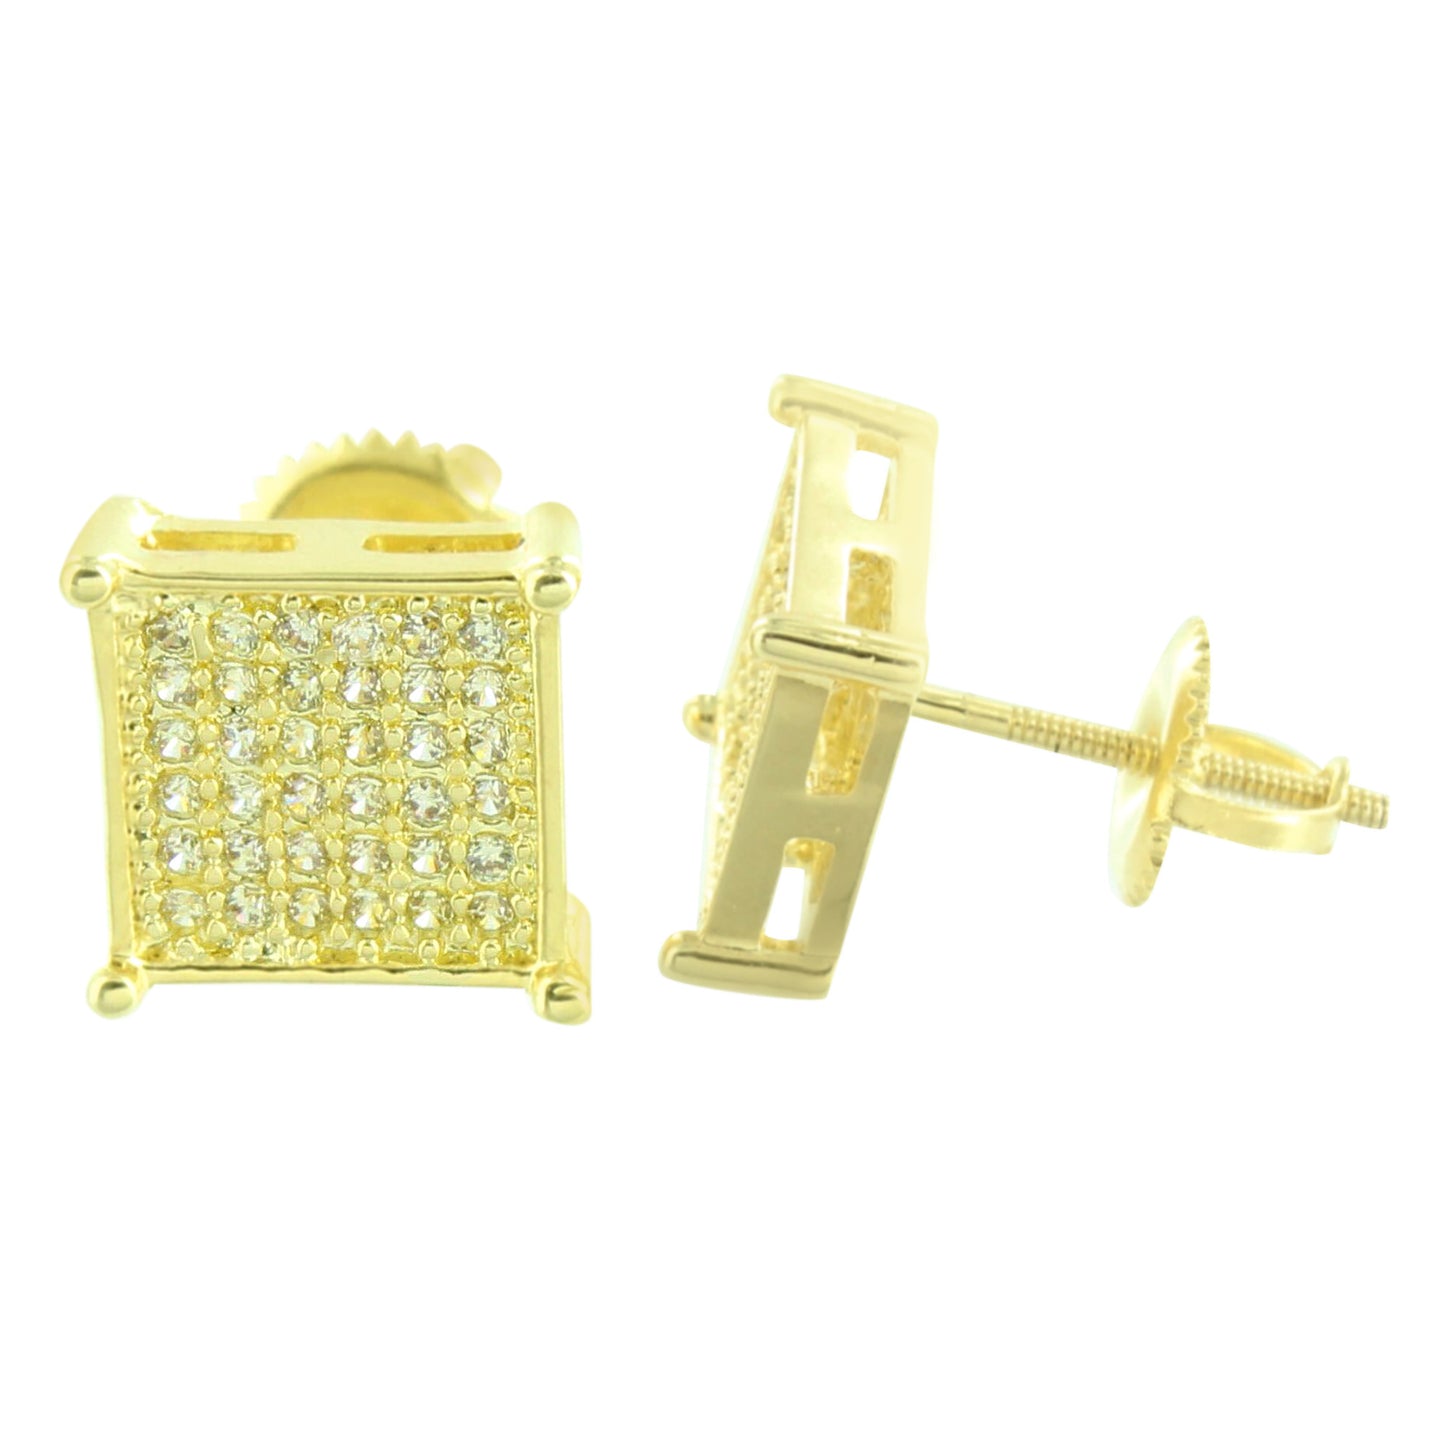 Canary Square Design Earrings Screw Back Mens Classy 8 MM